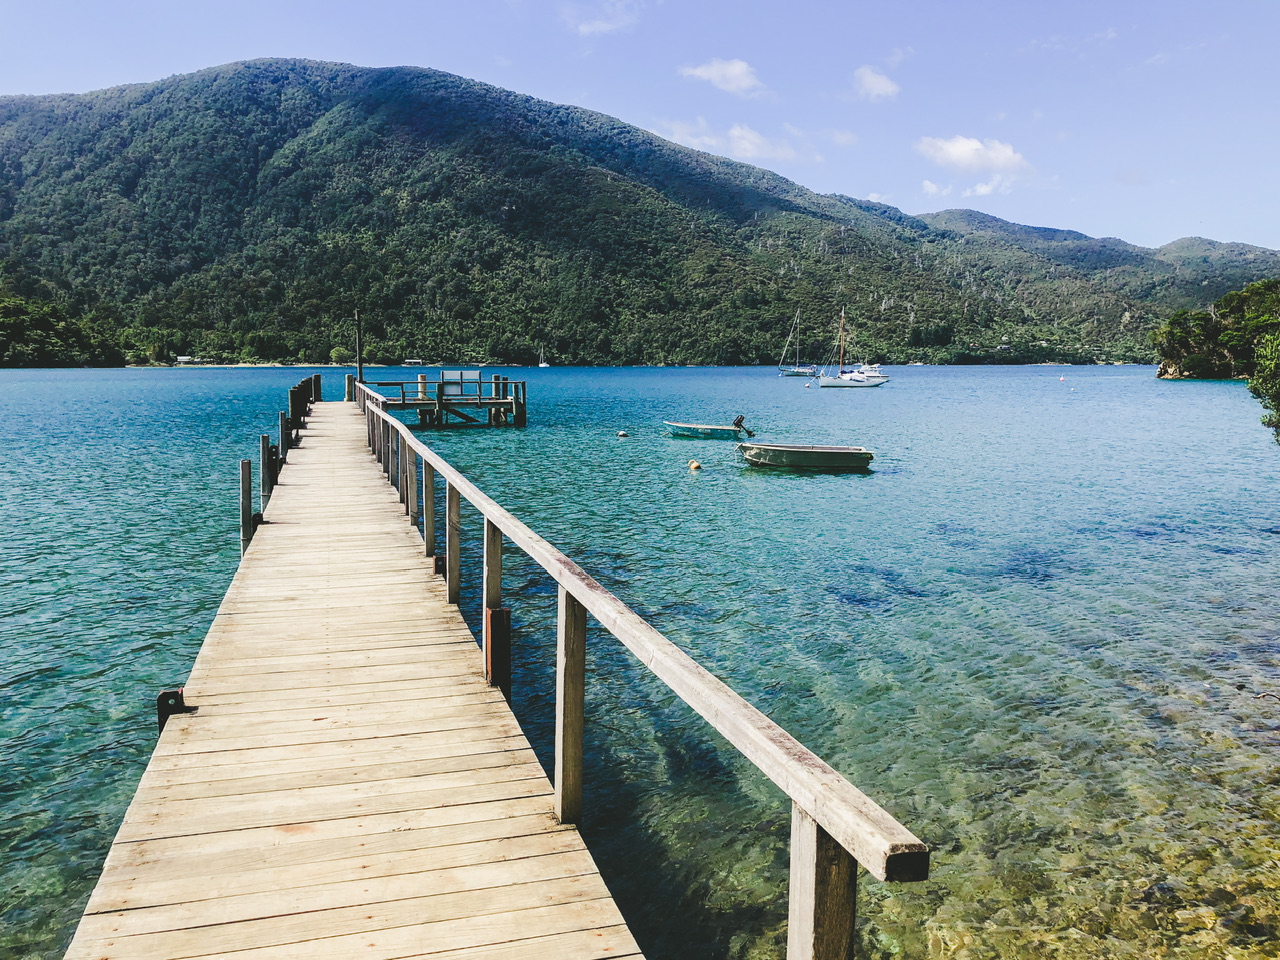 A wooden jetty juts out into Endeavour Inlet with a handrail on the right-hand side. The water is blue and clear and there ate two small boats close to the right side of the jetty. Small yachts and bush over the other side of the sound are visible in the background.